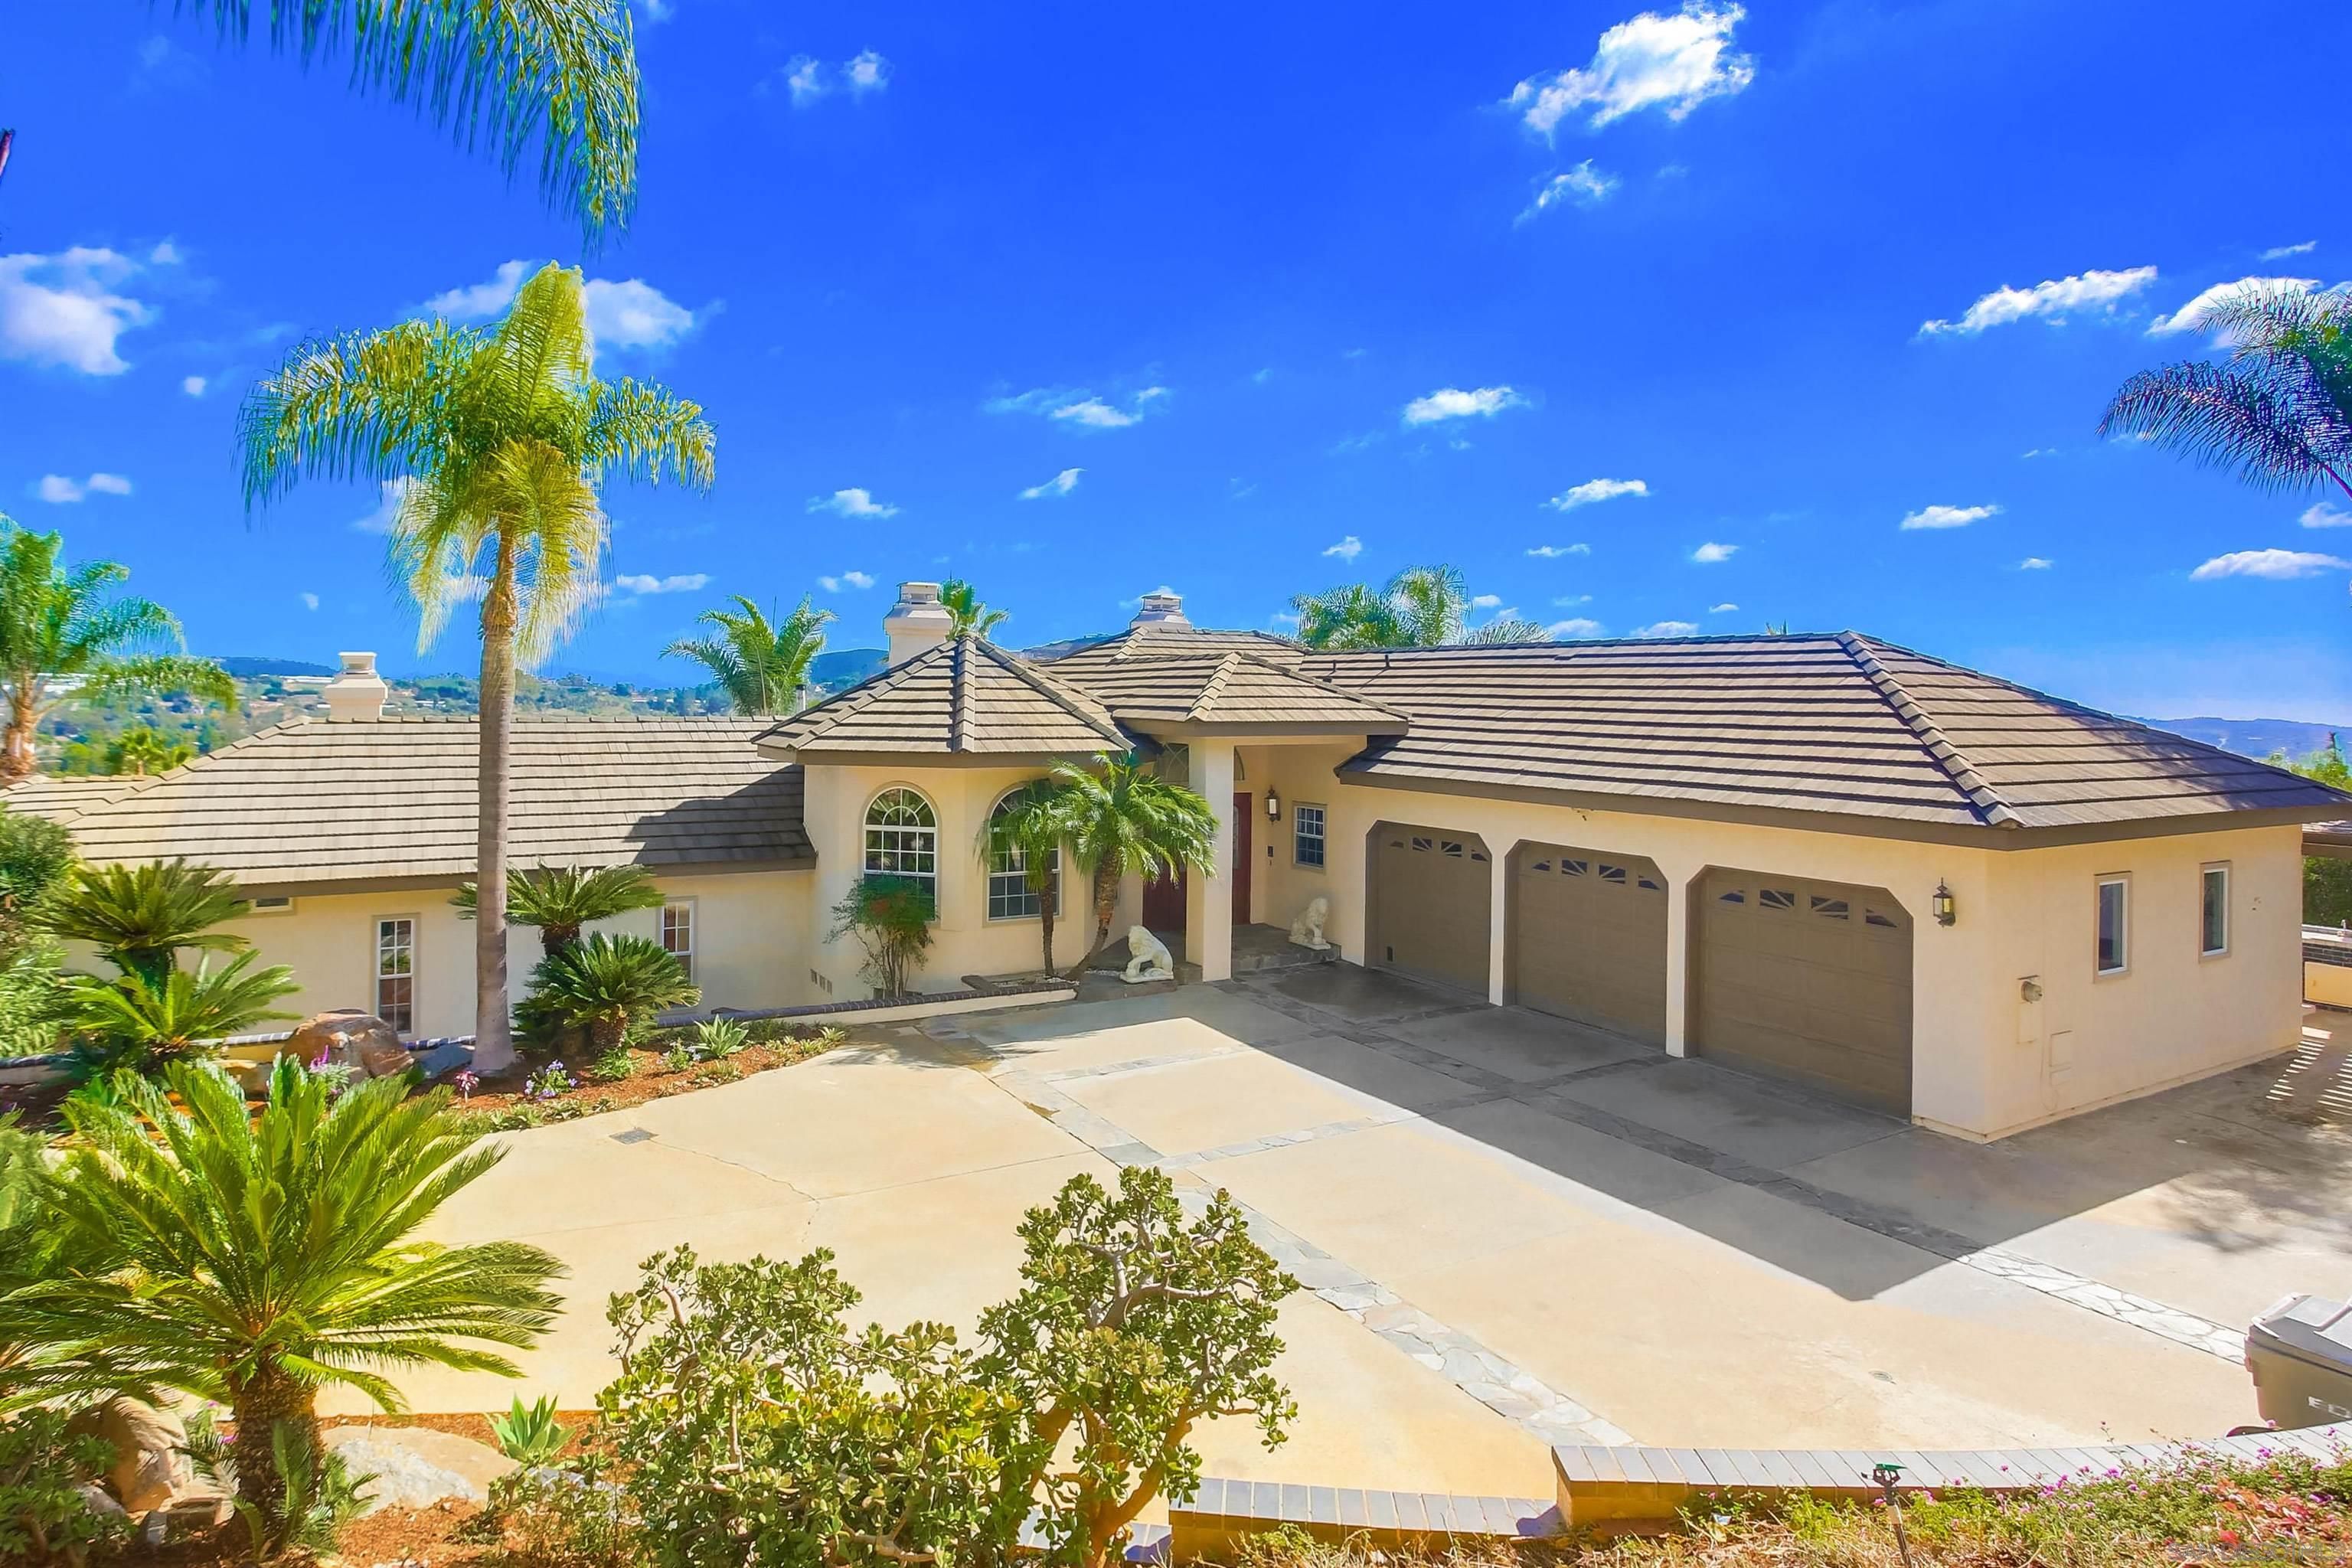 New property listed in North County, Vista